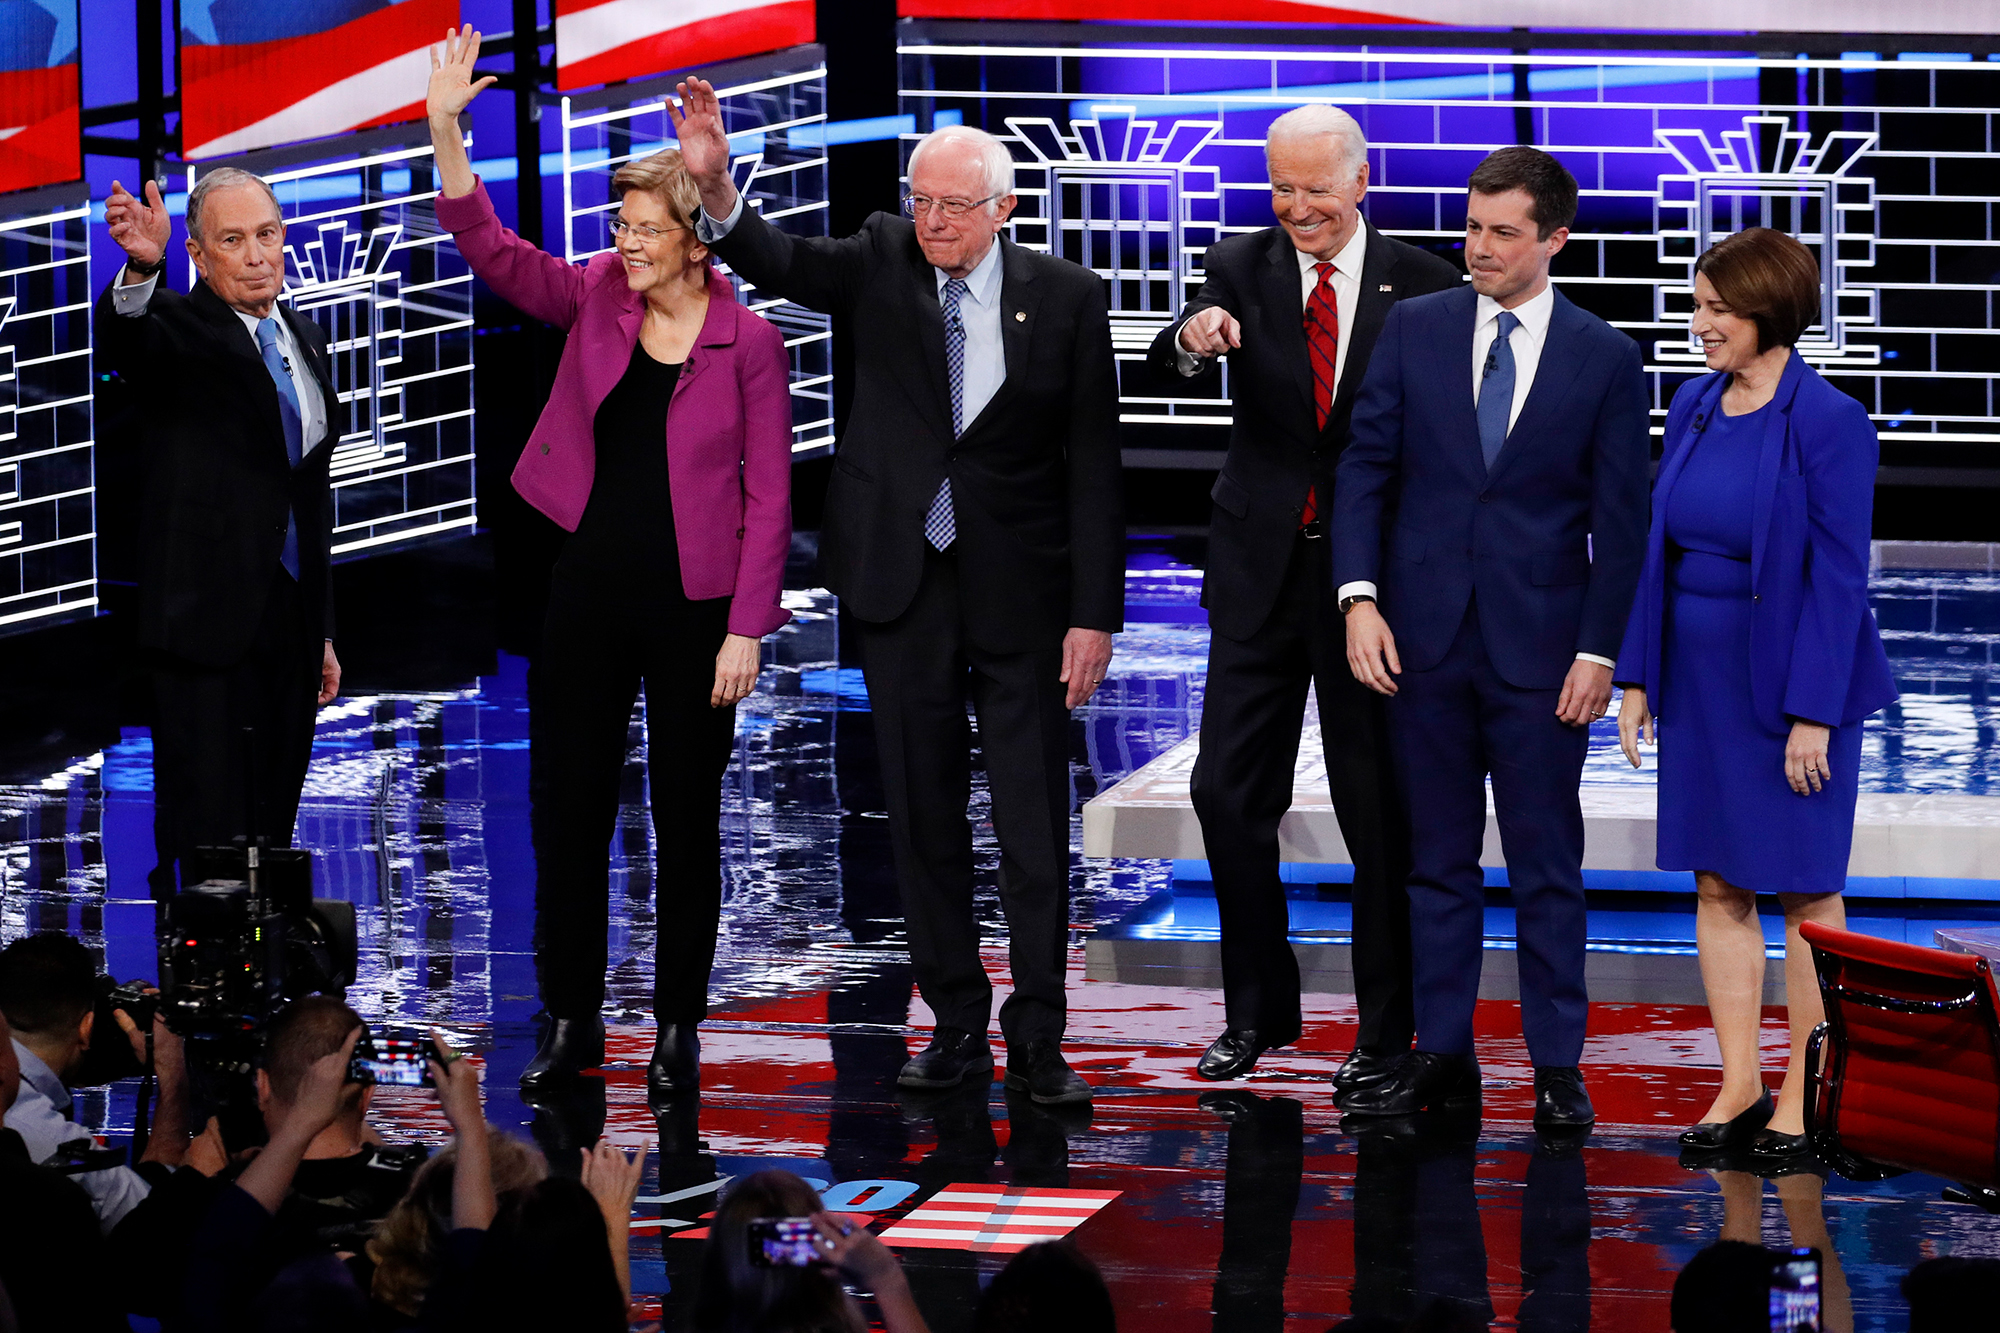 Vying for Vegas: Students React to Democratic Debate